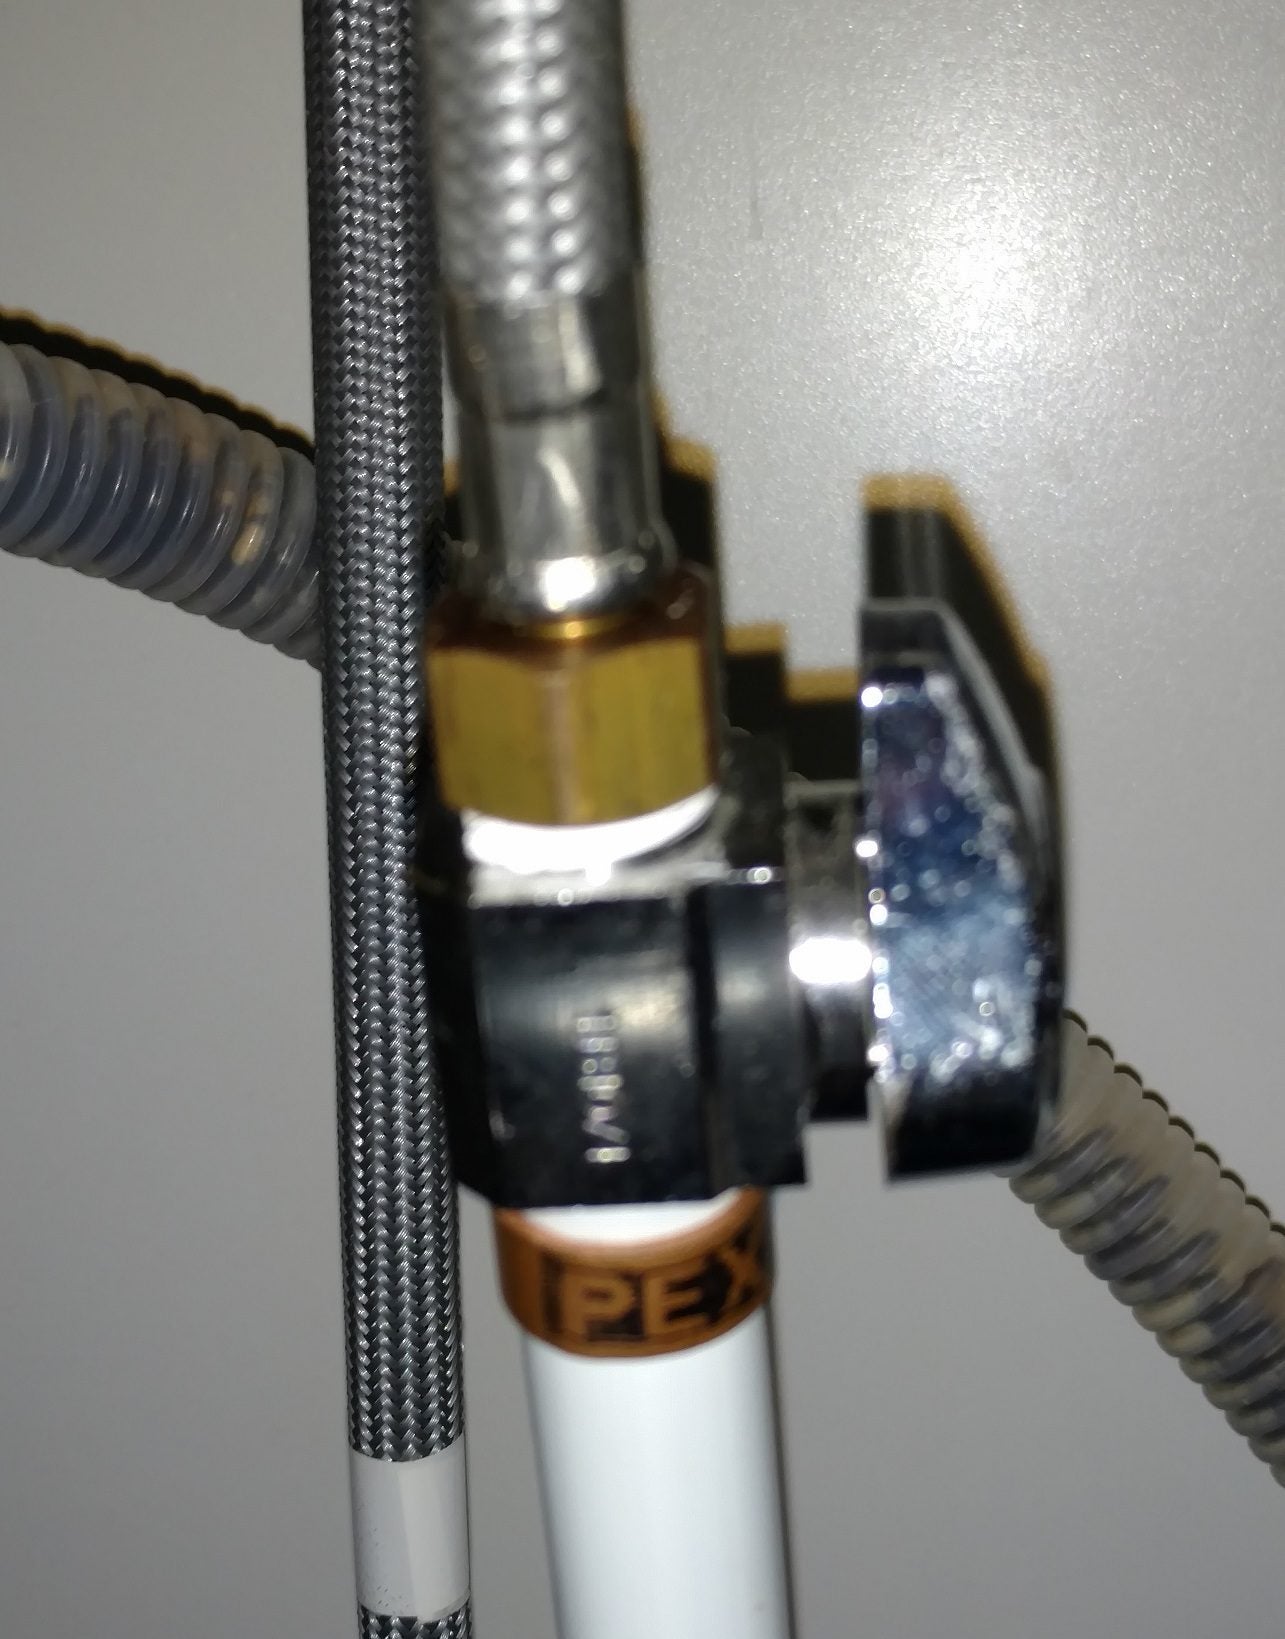 How to cap off old decomissioned fridge water line - RedFlagDeals.com Forums